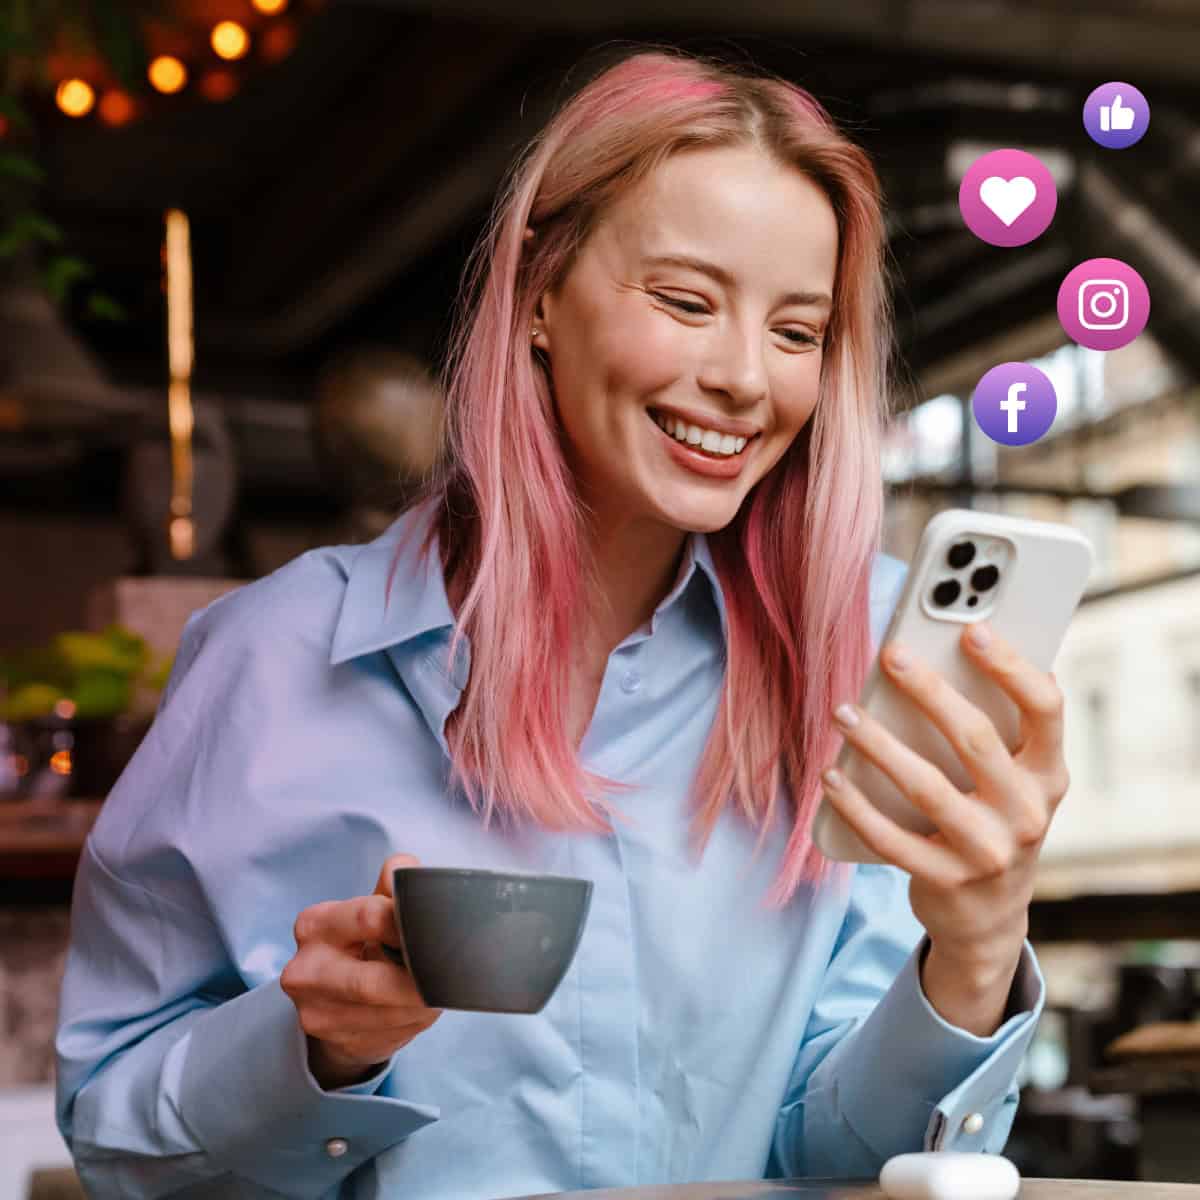 woman holding iPhone looking at social media marketing ideas